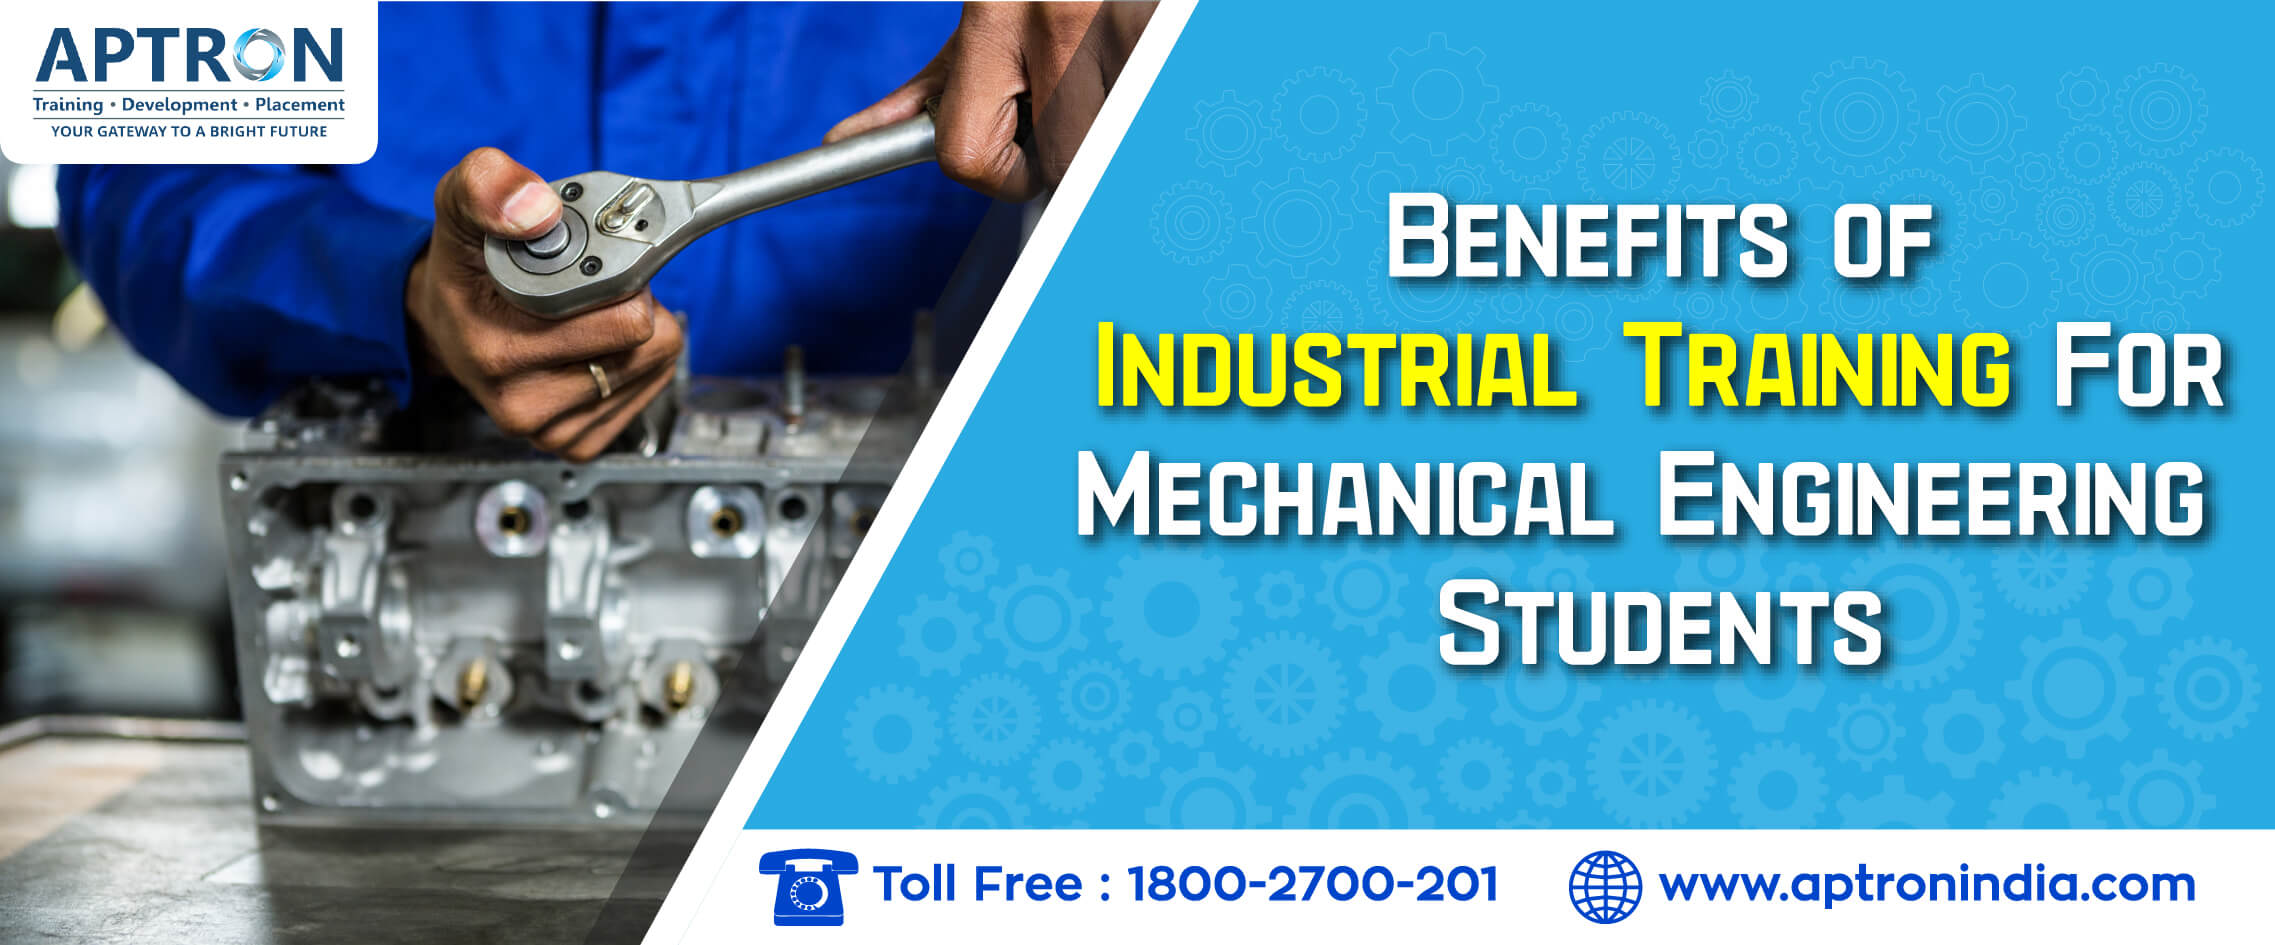 Benefits of Industrial Training for Mechanical Engineering Students